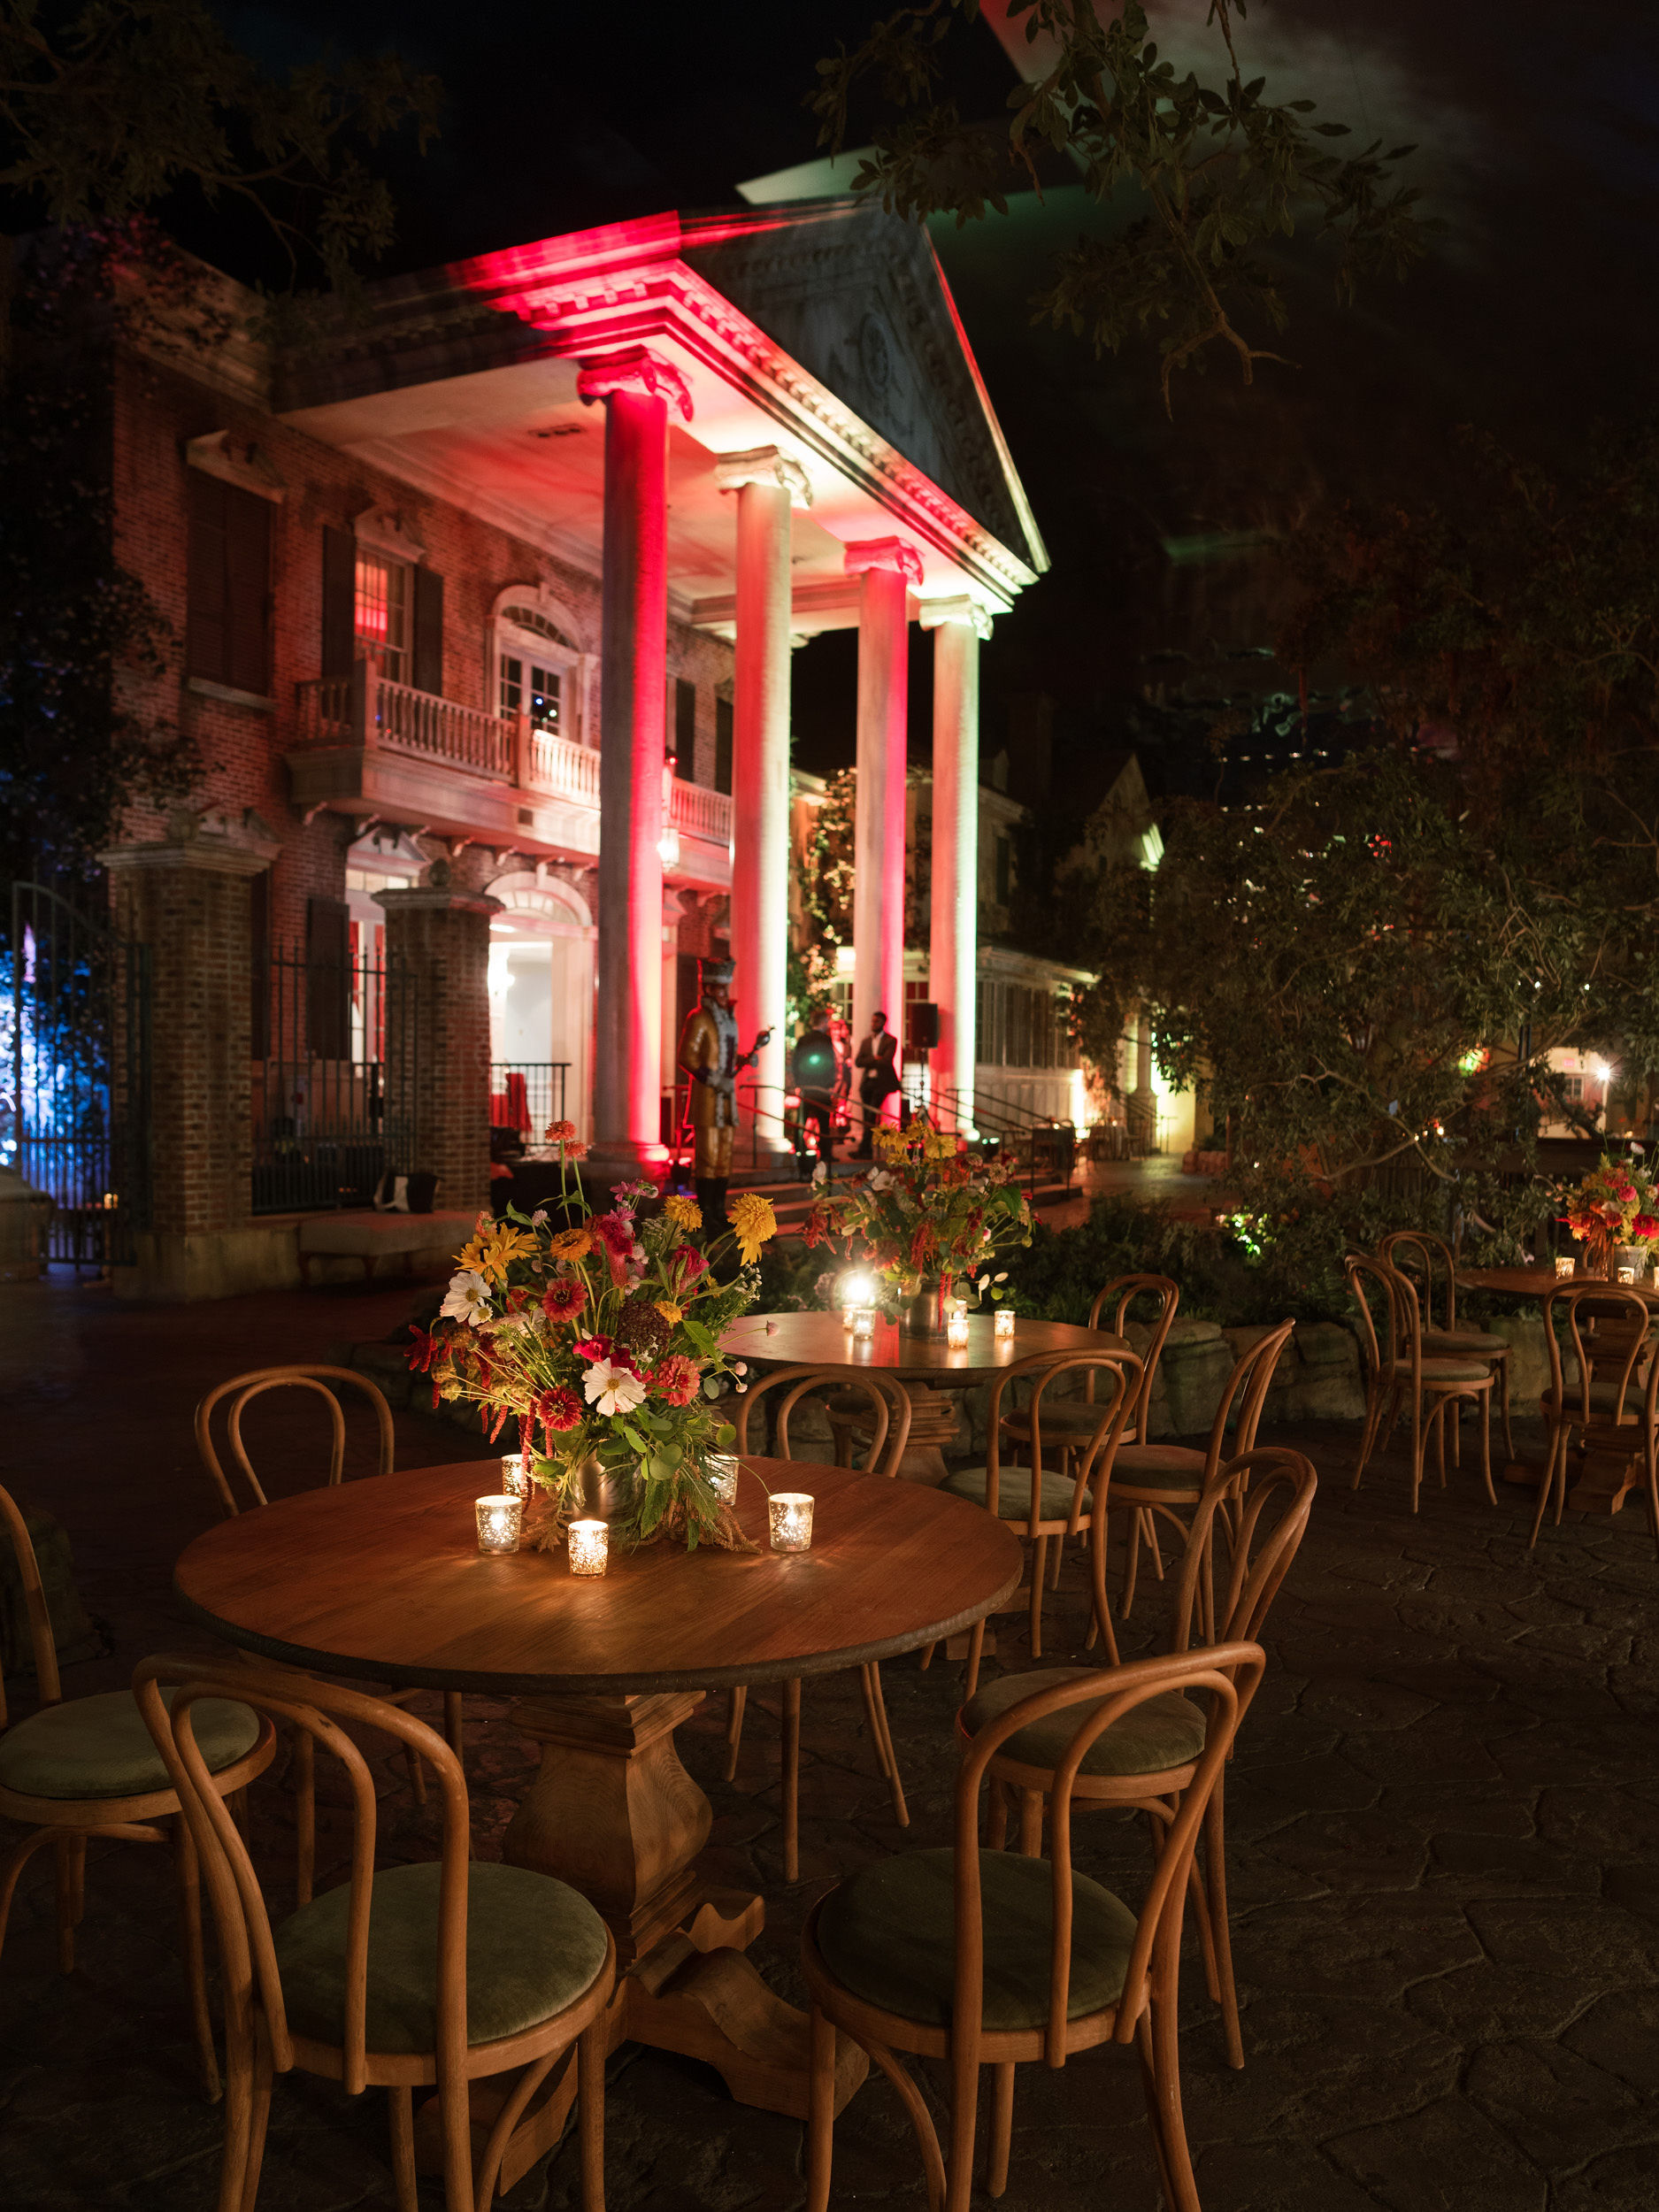 Gala Event Outdoor Lighting Design, Table, and Flower Centerpiece Arrangement in New Orleans